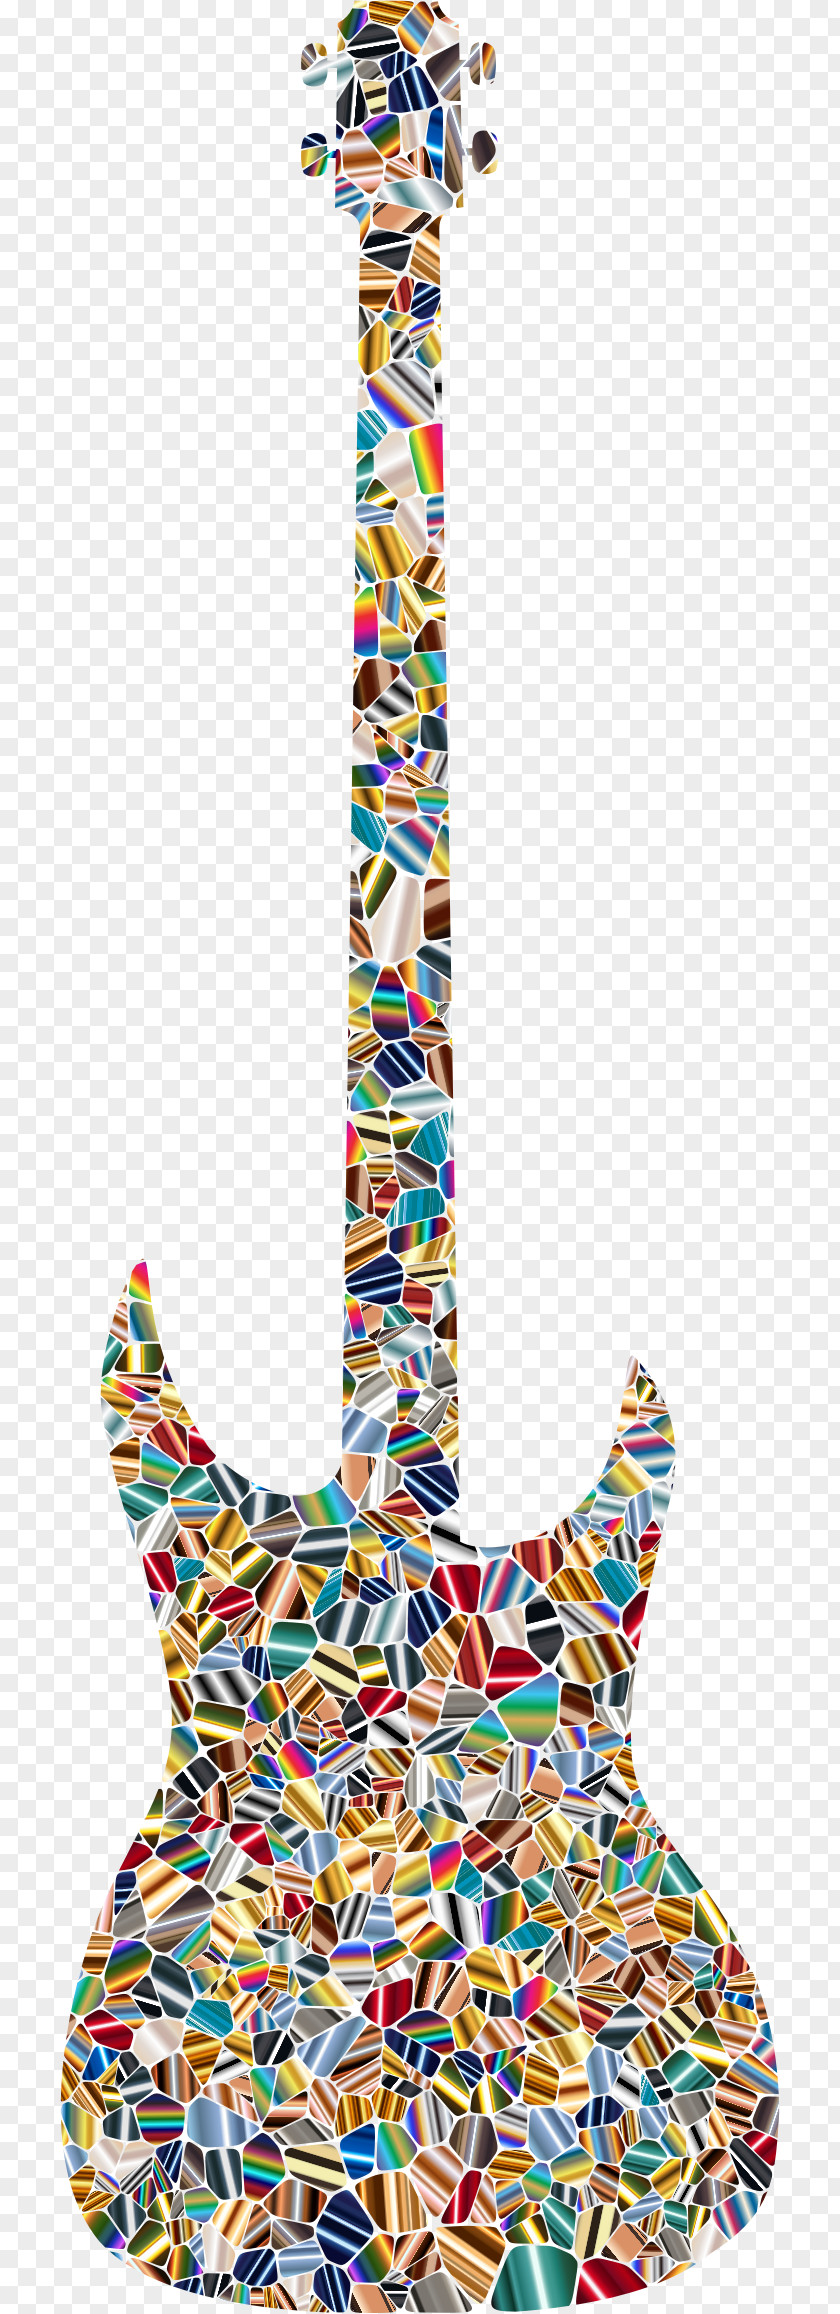 Guitar Psychedelic Rock Drawing Clip Art PNG